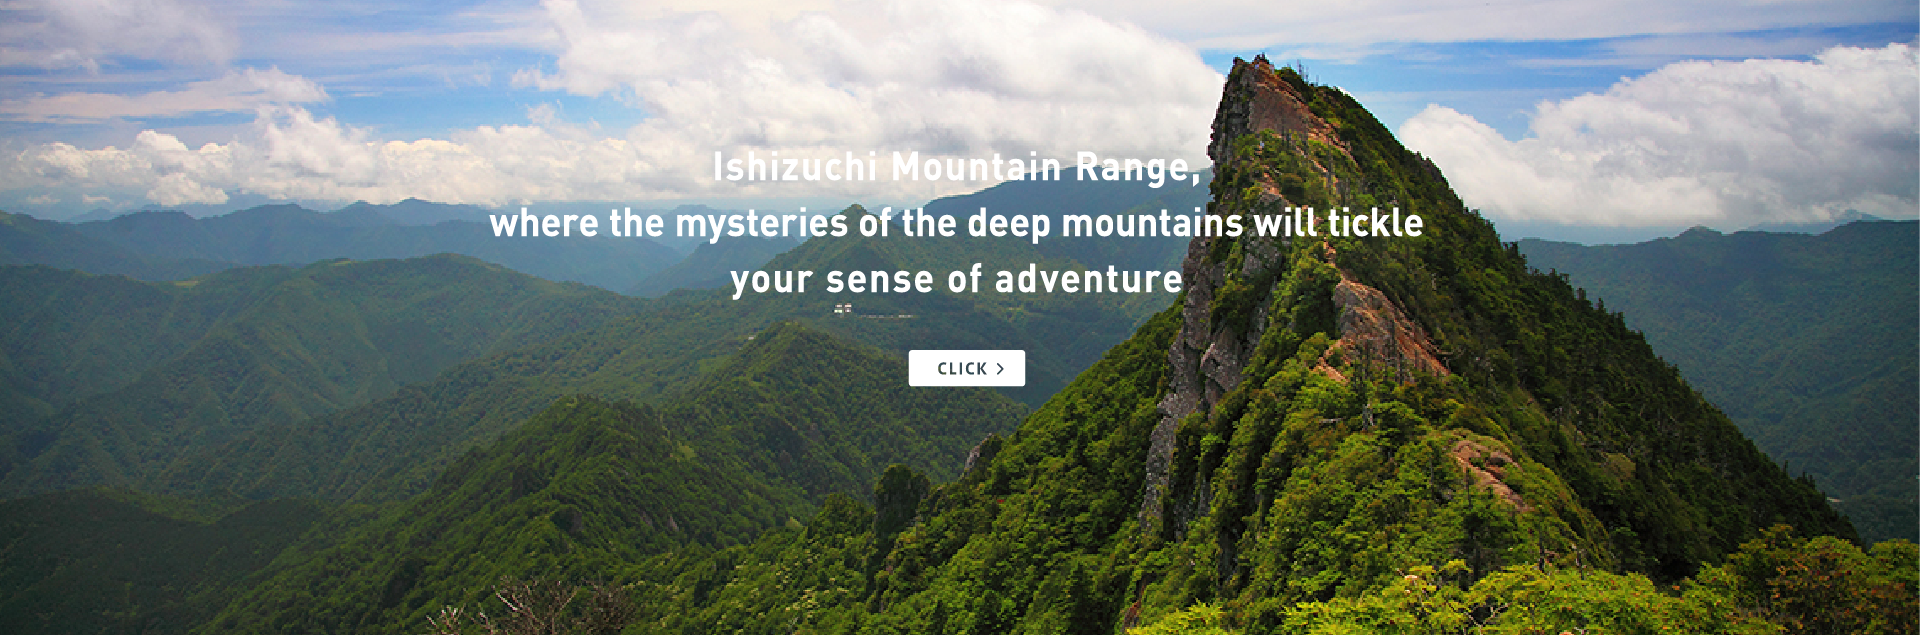 Ishizuchi Mountain Range,where the mysteries of the deep mountains will tickle your sense of adventure